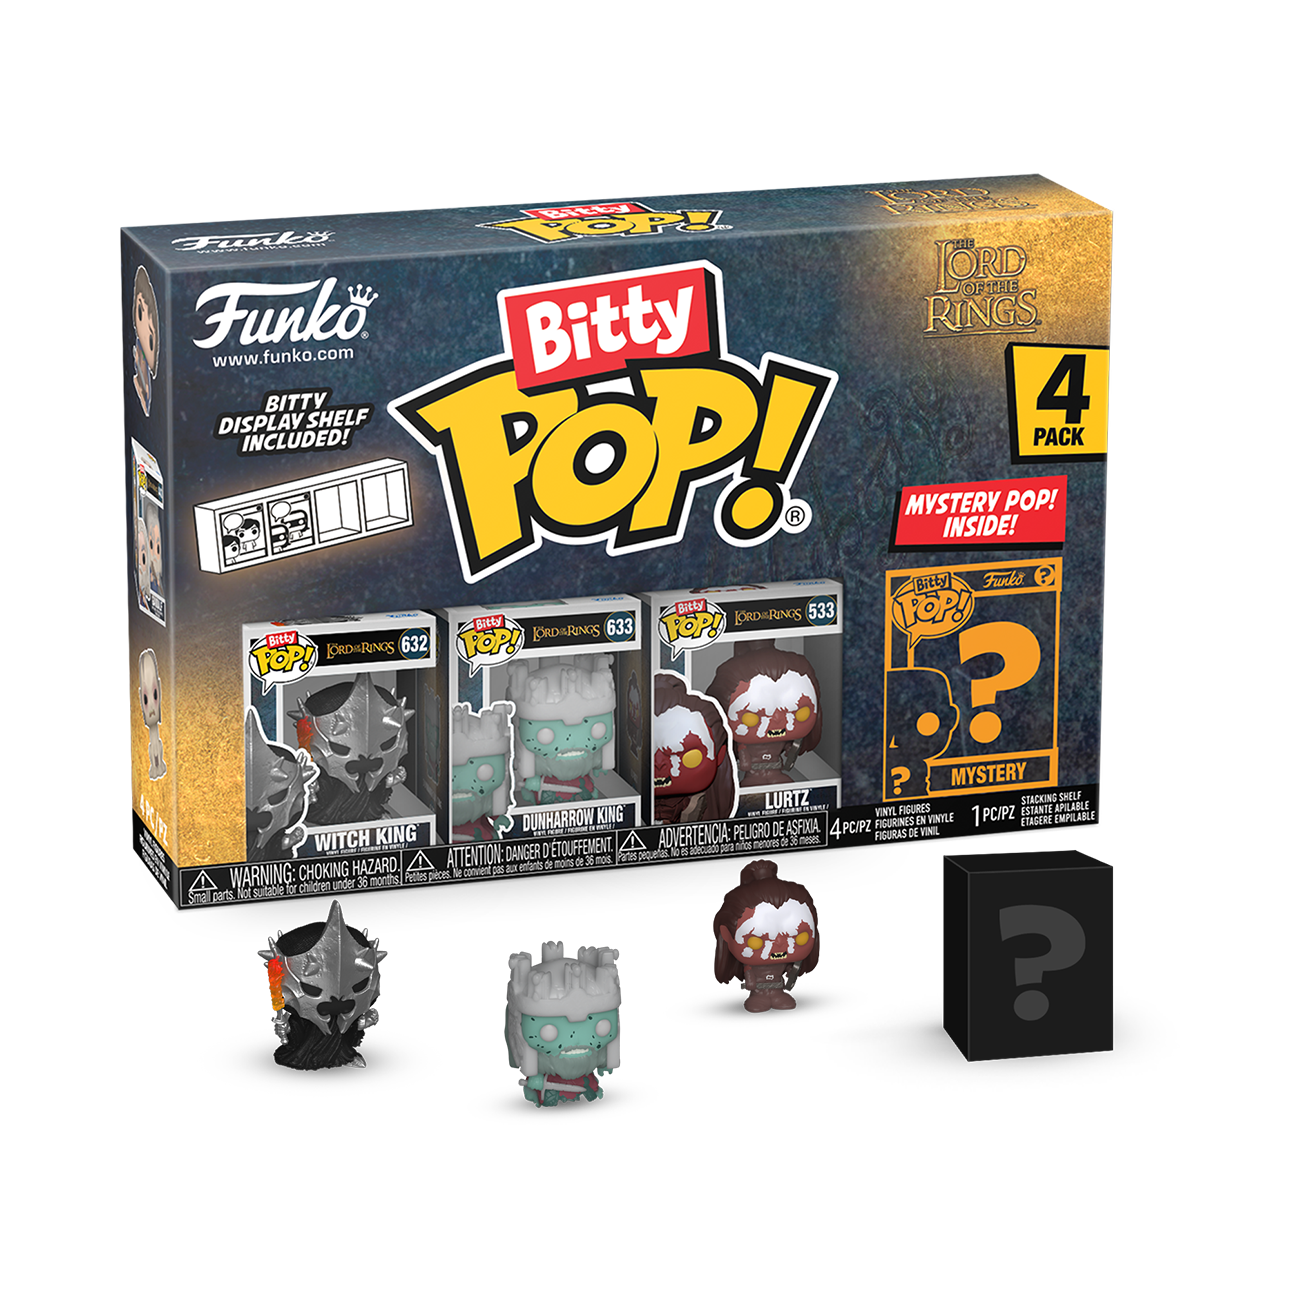 Funko BITTY POP! The Lord Of The Rings 4-Pack Series 4